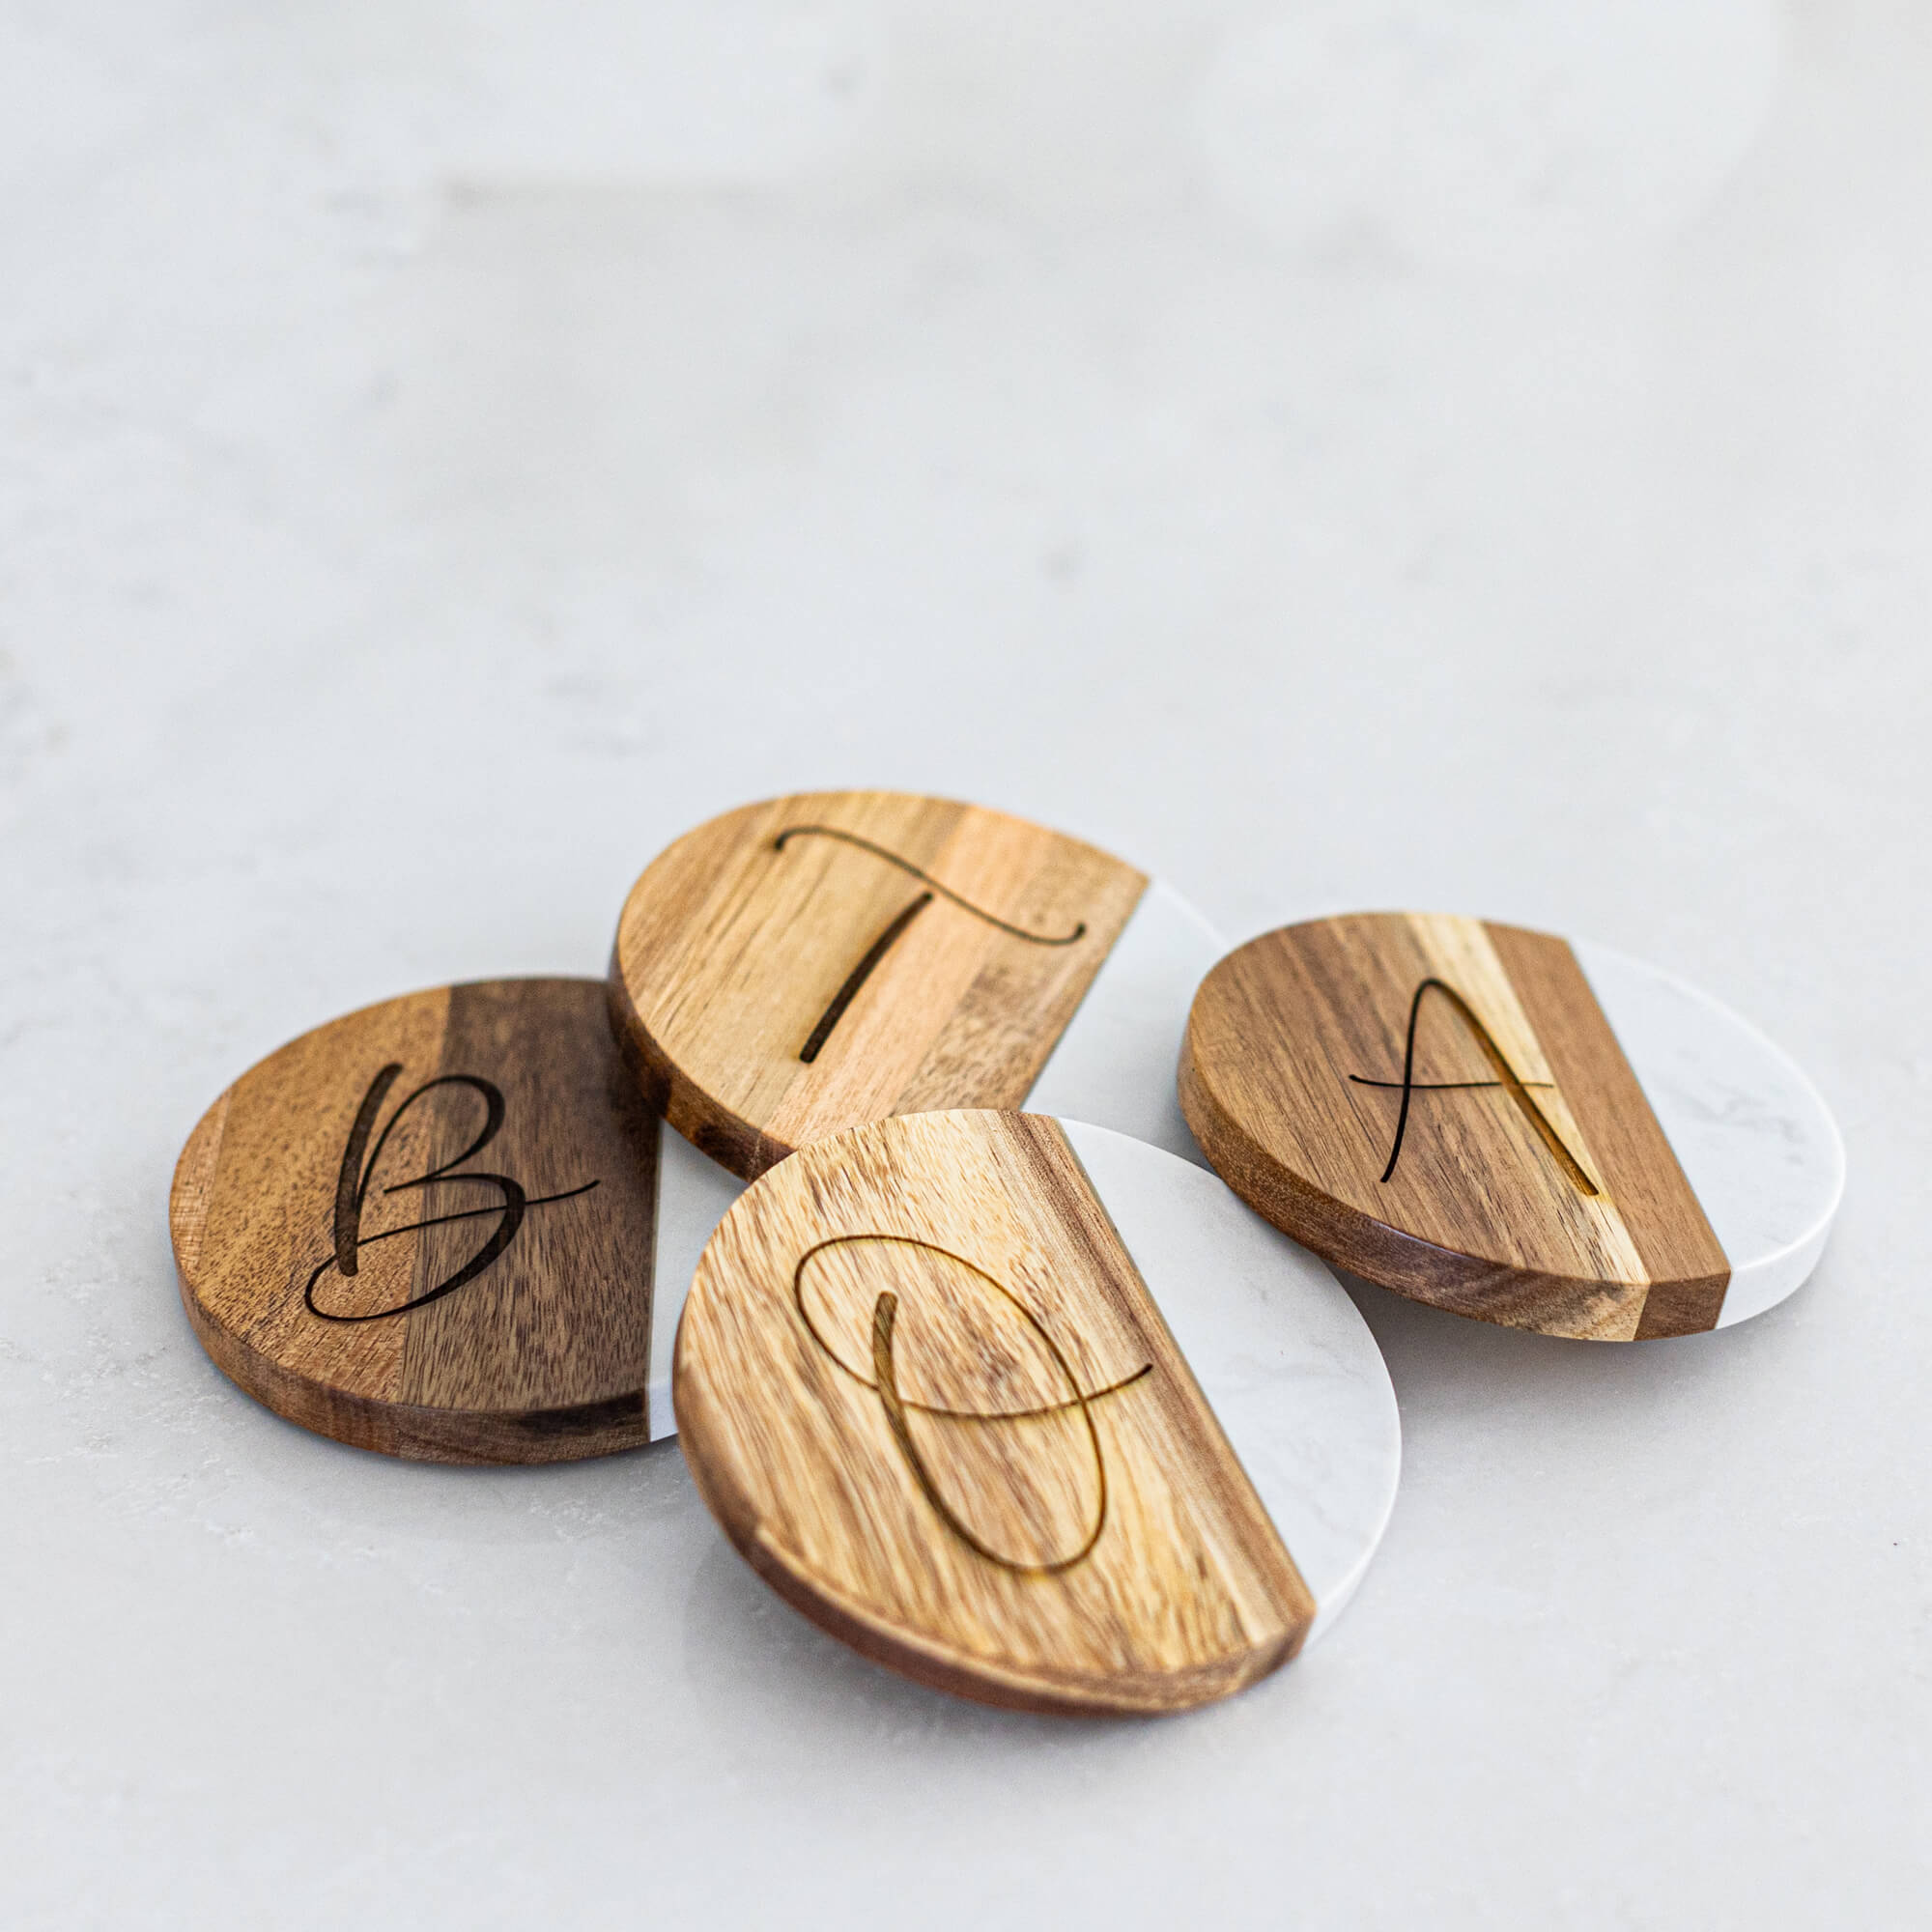 Marble and Acacia Wood Coasters with Initial - Set of 4 - Round